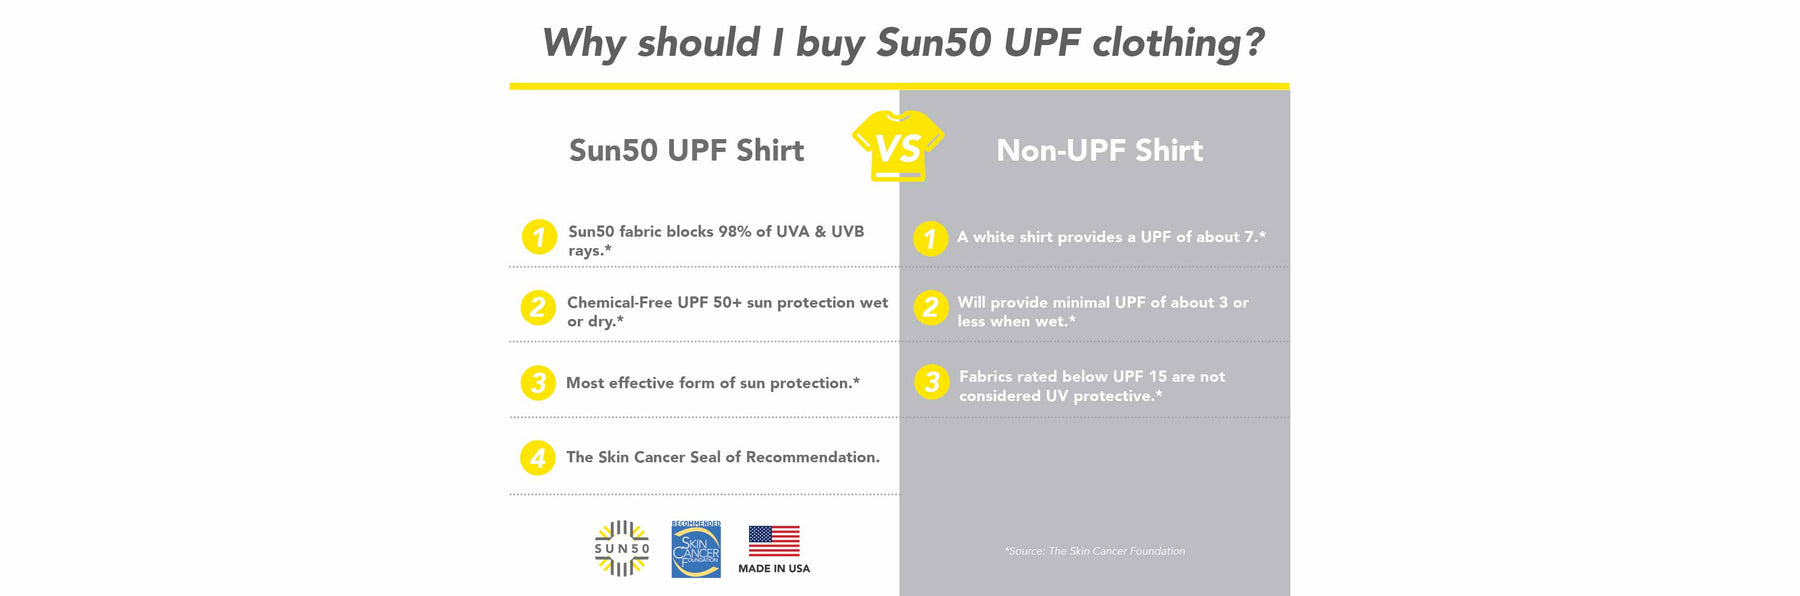 Why Sun50 Sun Protection clothing is Luxury and Elite to other like Coolibar, UV Skins, Cabana life. Sun50 sun protection clothing is UPF 50+, Made in the USA, Chemical Free, Recommended by the Skin Cancer Foundation. - Sun50 